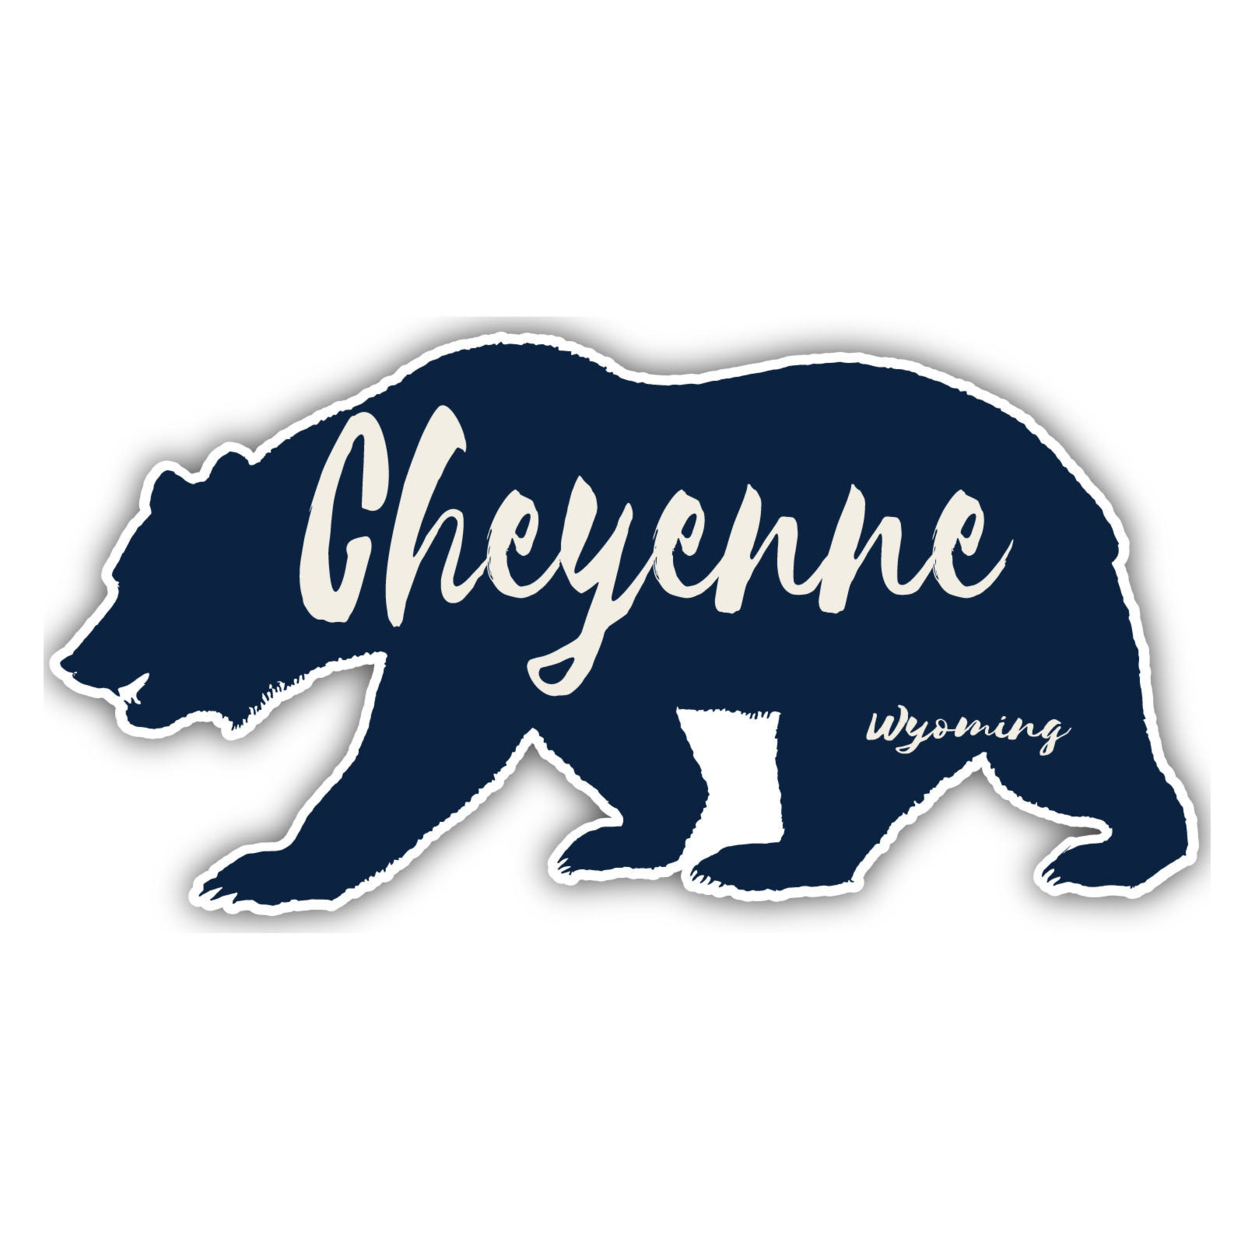 Cheyenne Wyoming Souvenir Decorative Stickers (Choose Theme And Size) - 4-Pack, 10-Inch, Camp Life